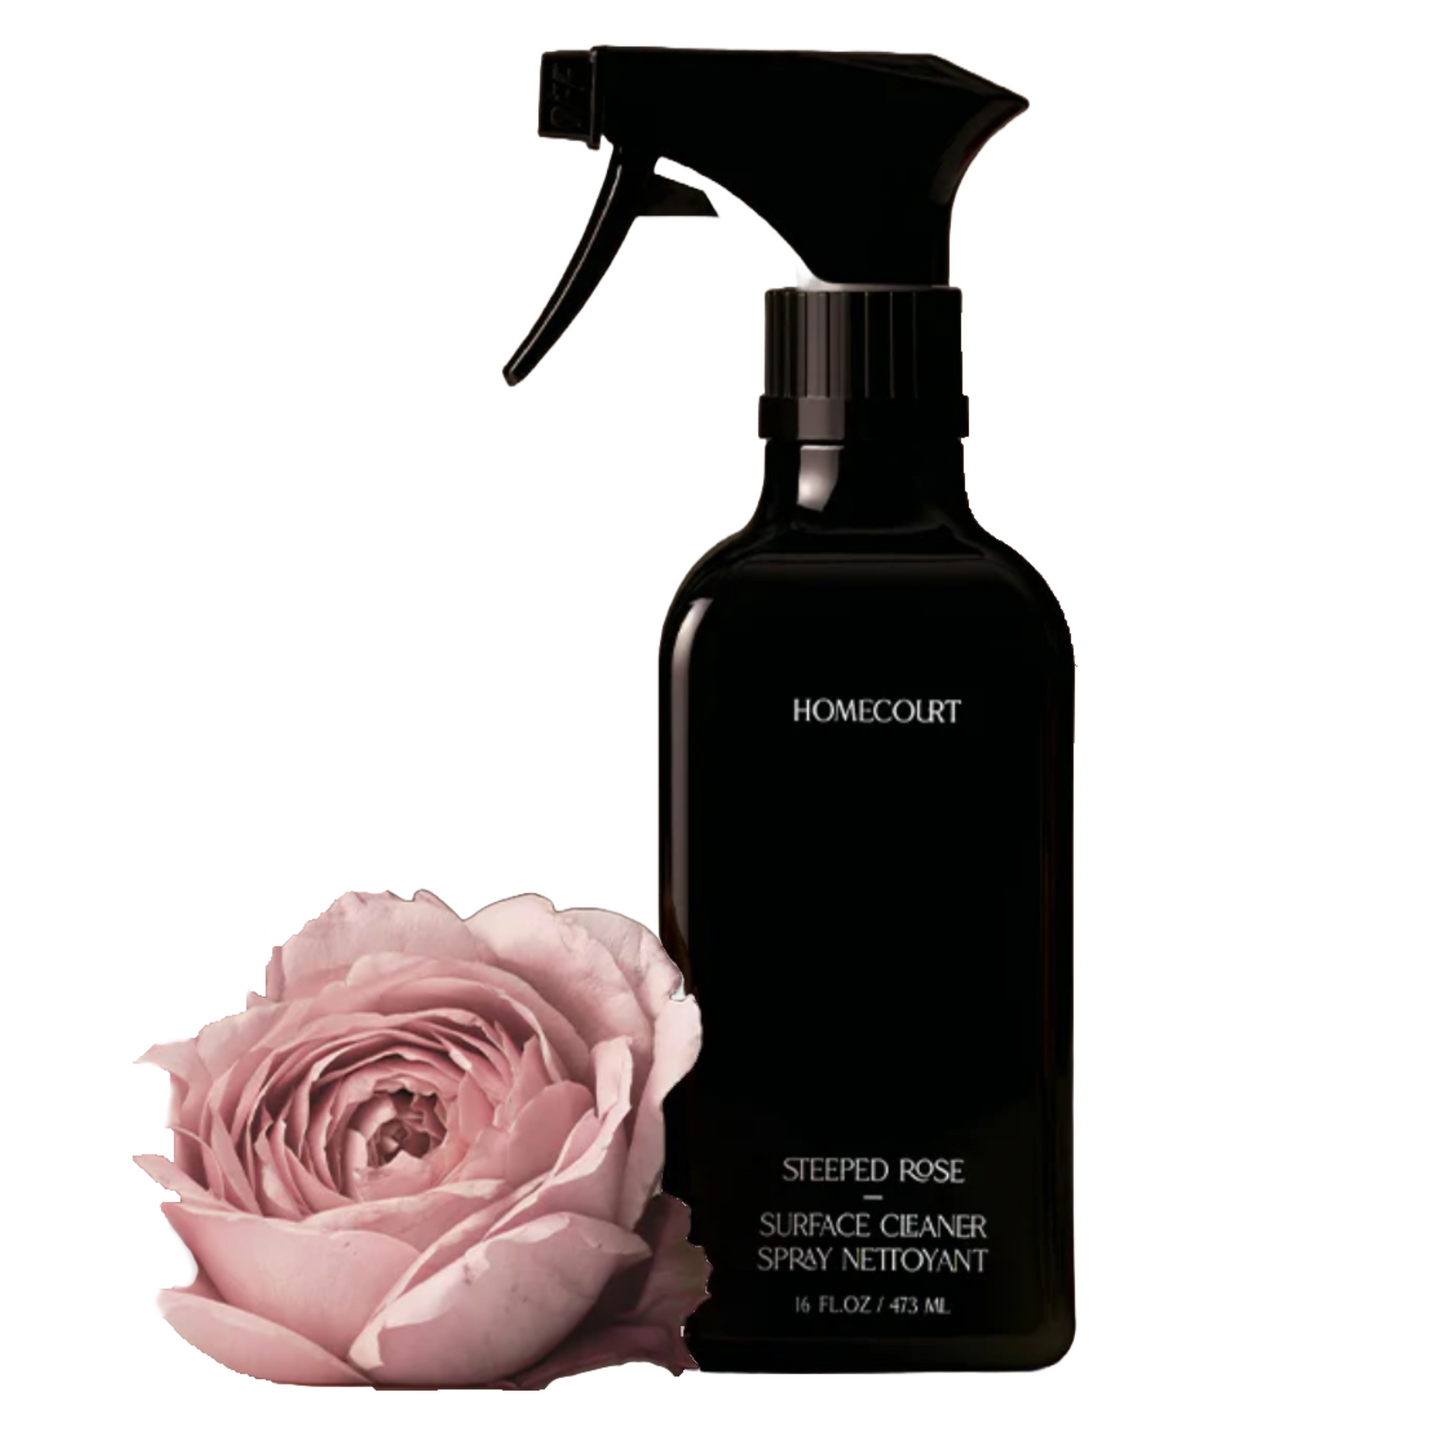 Steeped Rose Surface Cleaner by Homecourt